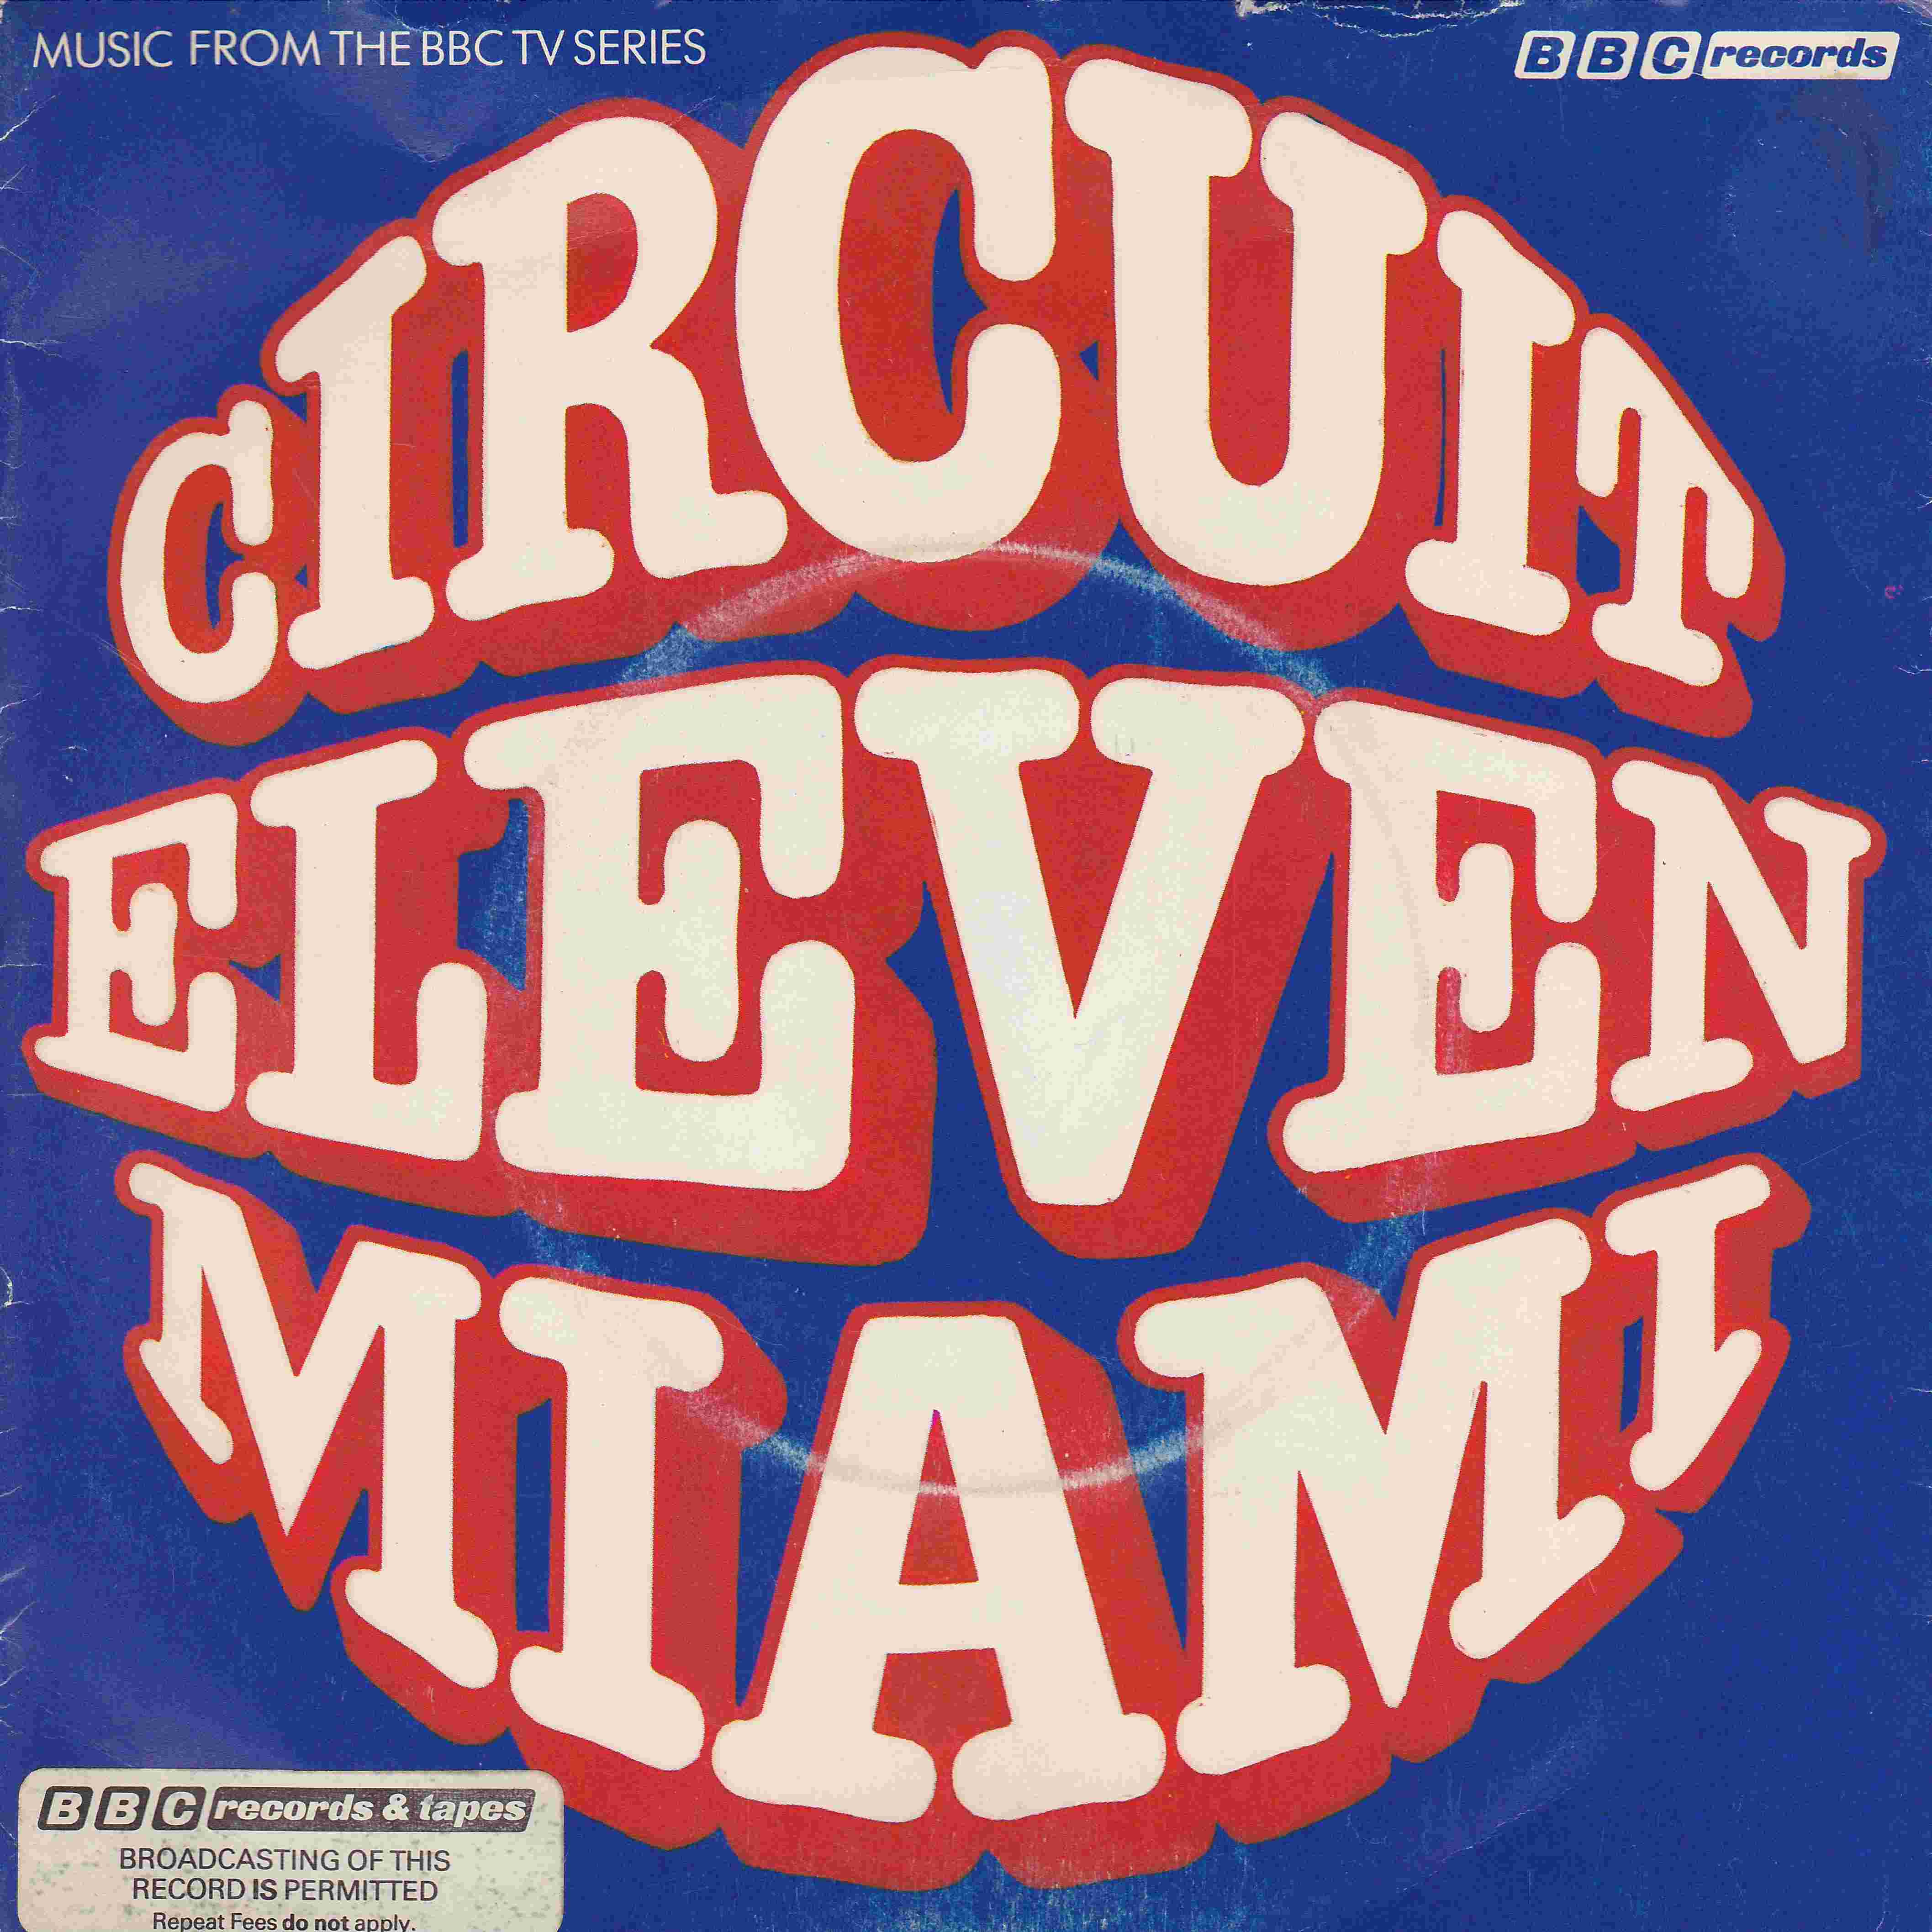 Picture of RESL 70 Circuit eleven - Miami (Promotional record) by artist Richard Denton / Martin Cook from the BBC singles - Records and Tapes library